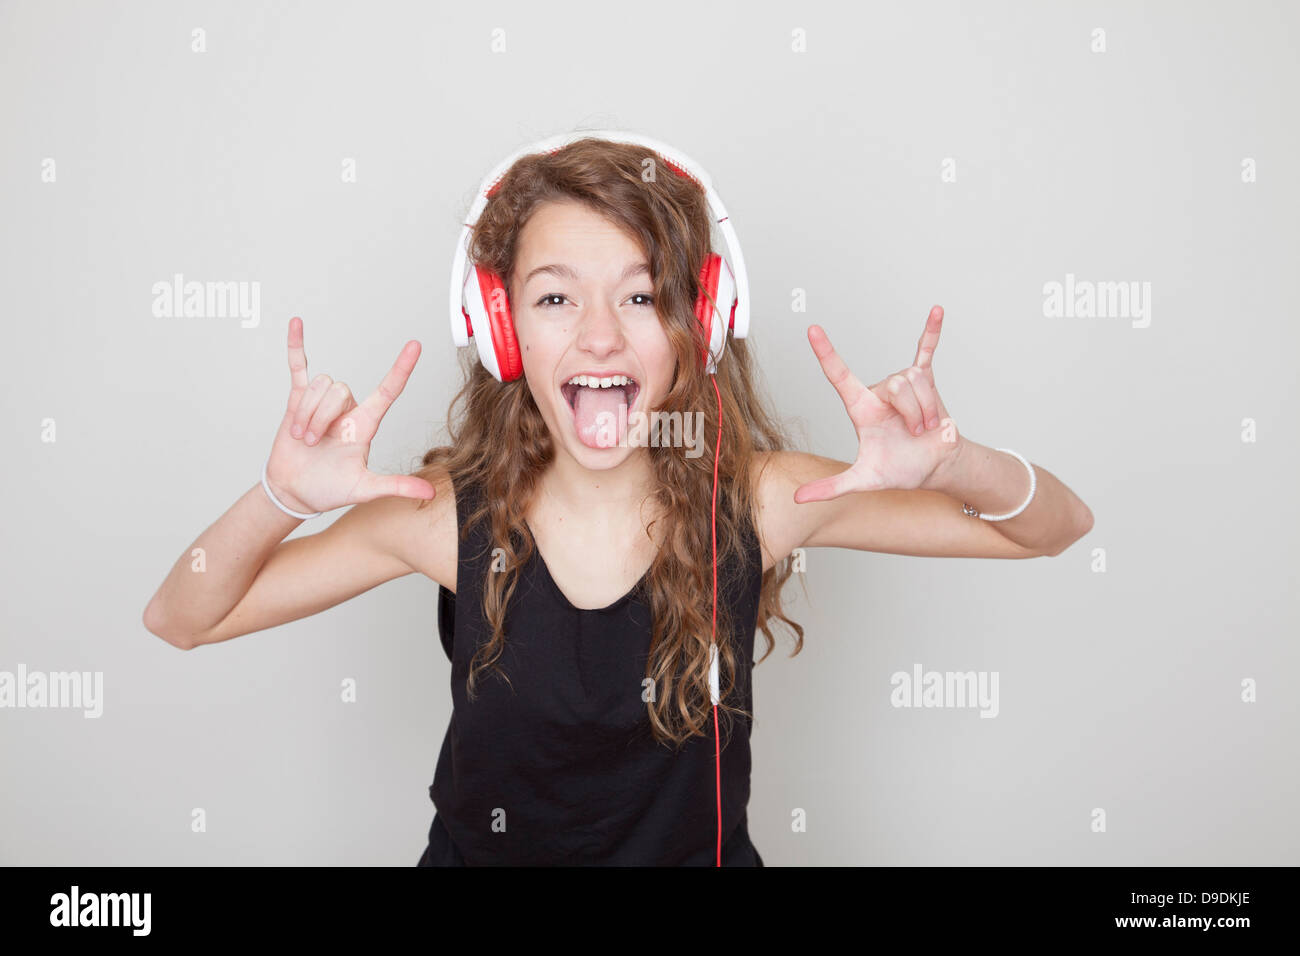 Girl wearing headphones making devil signs and sticking tongue out Stock Photo